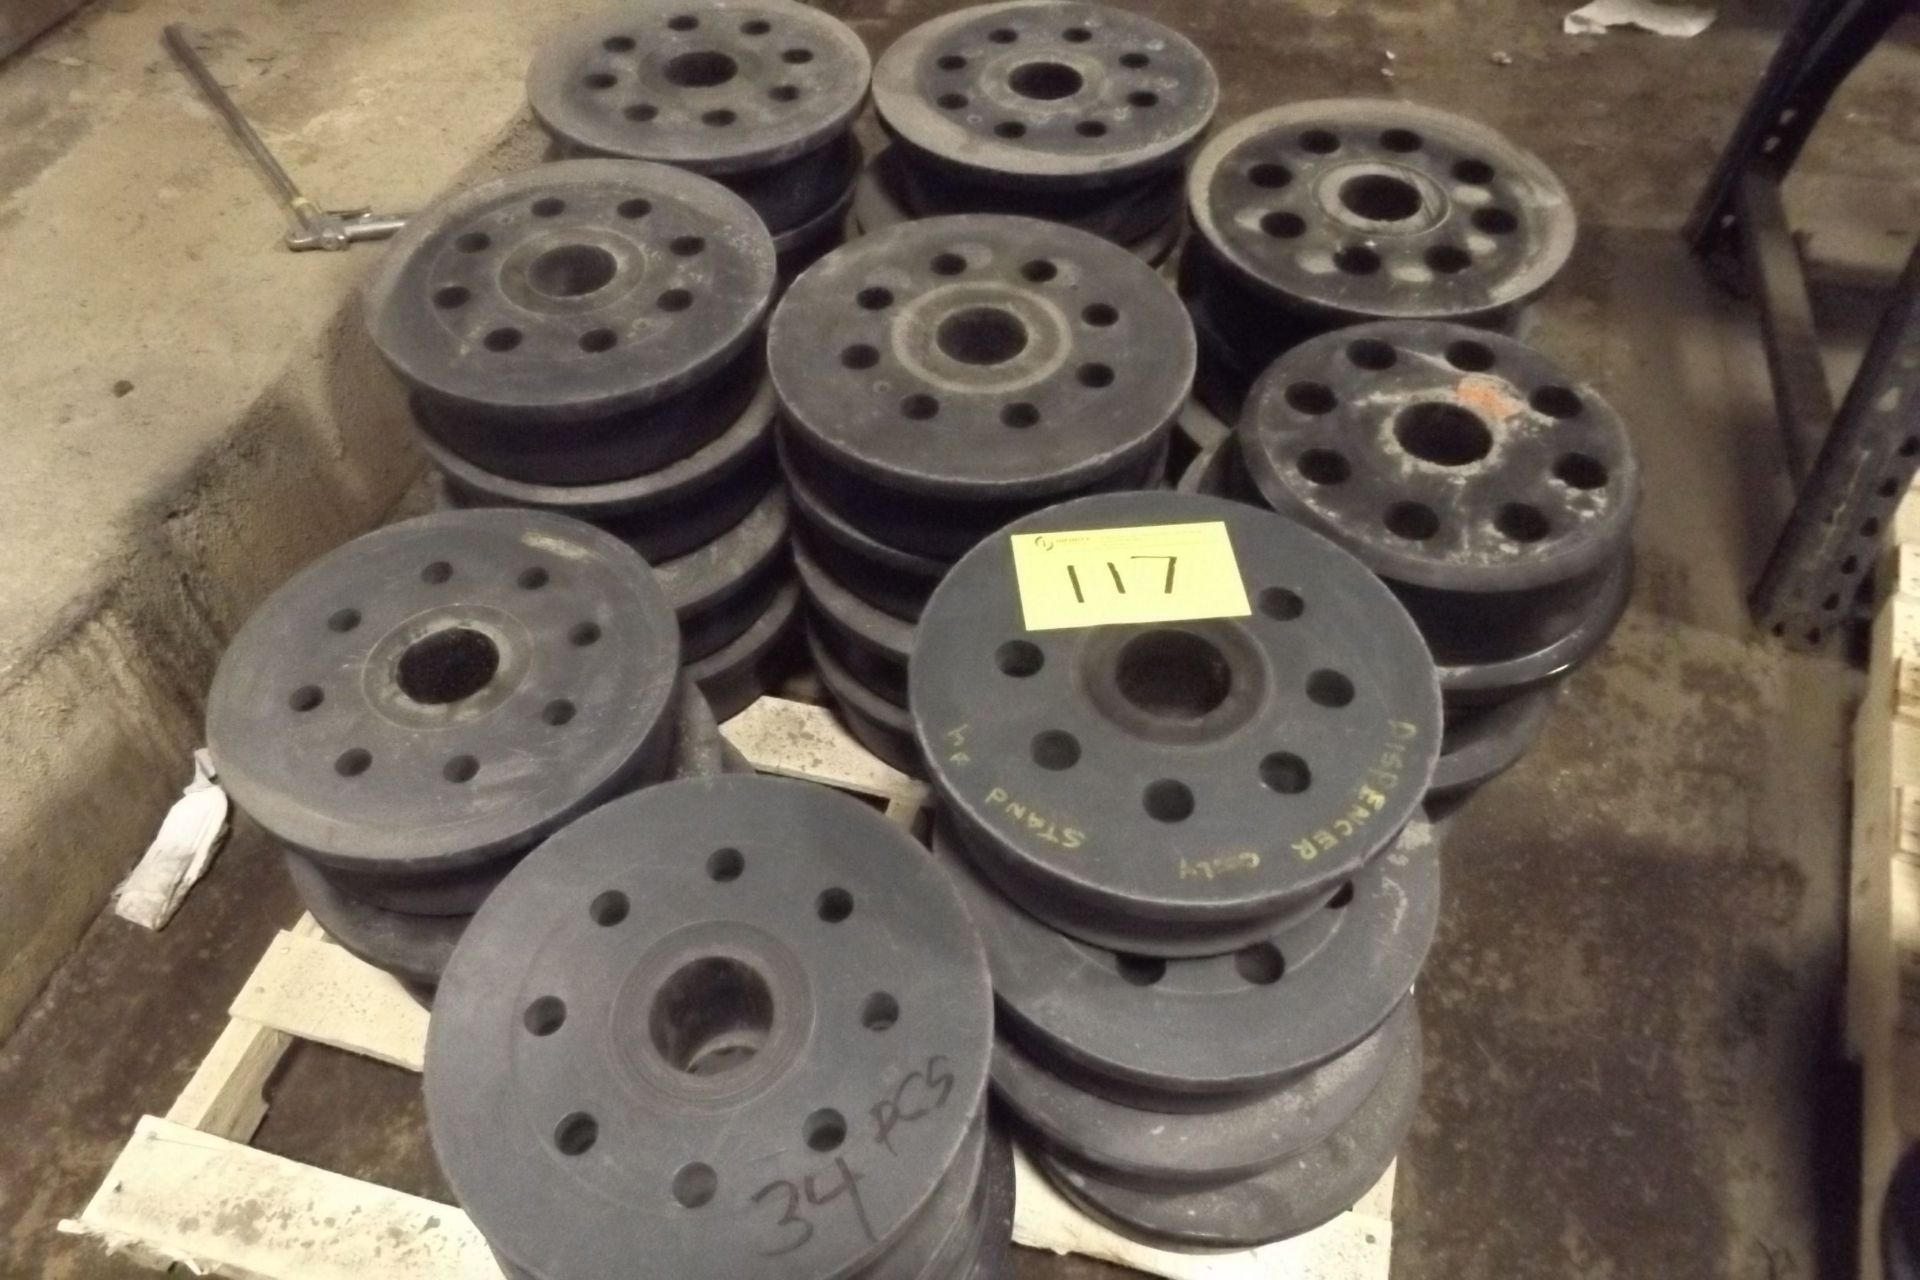 LOT OF (34) 12" CORE CHUCK ADAPTERS FOR 3" SHAFTS [RAIL DOCK]